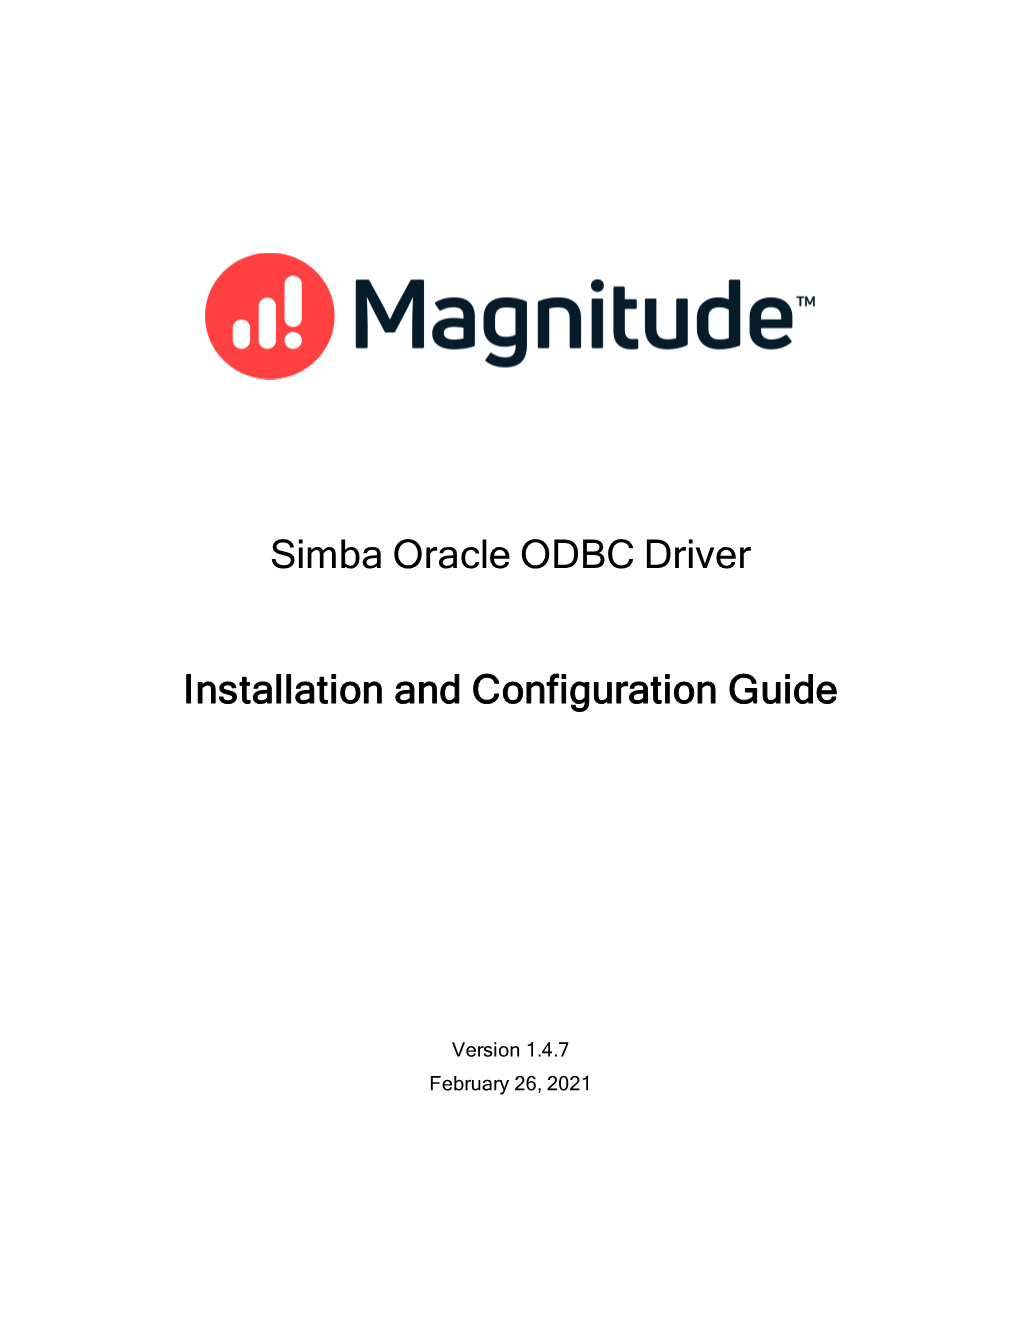 Simba Oracle ODBC Driver Installation and Configuration Guide Explains How to Install and Configure the Simba Oracle ODBC Driver